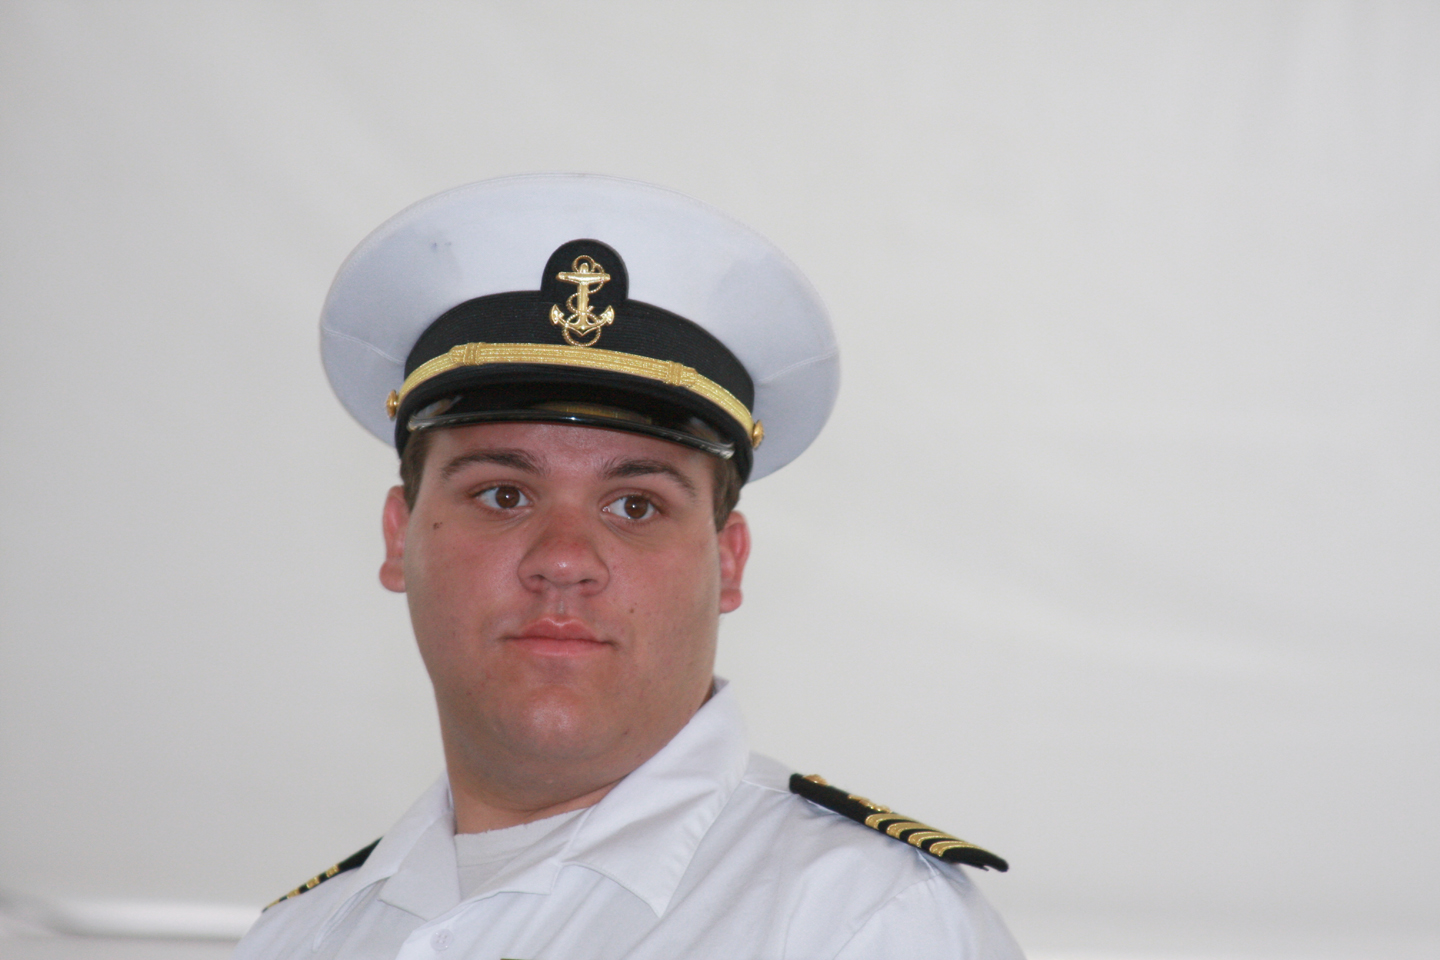 a sailor posing for a pograph wearing a uniform